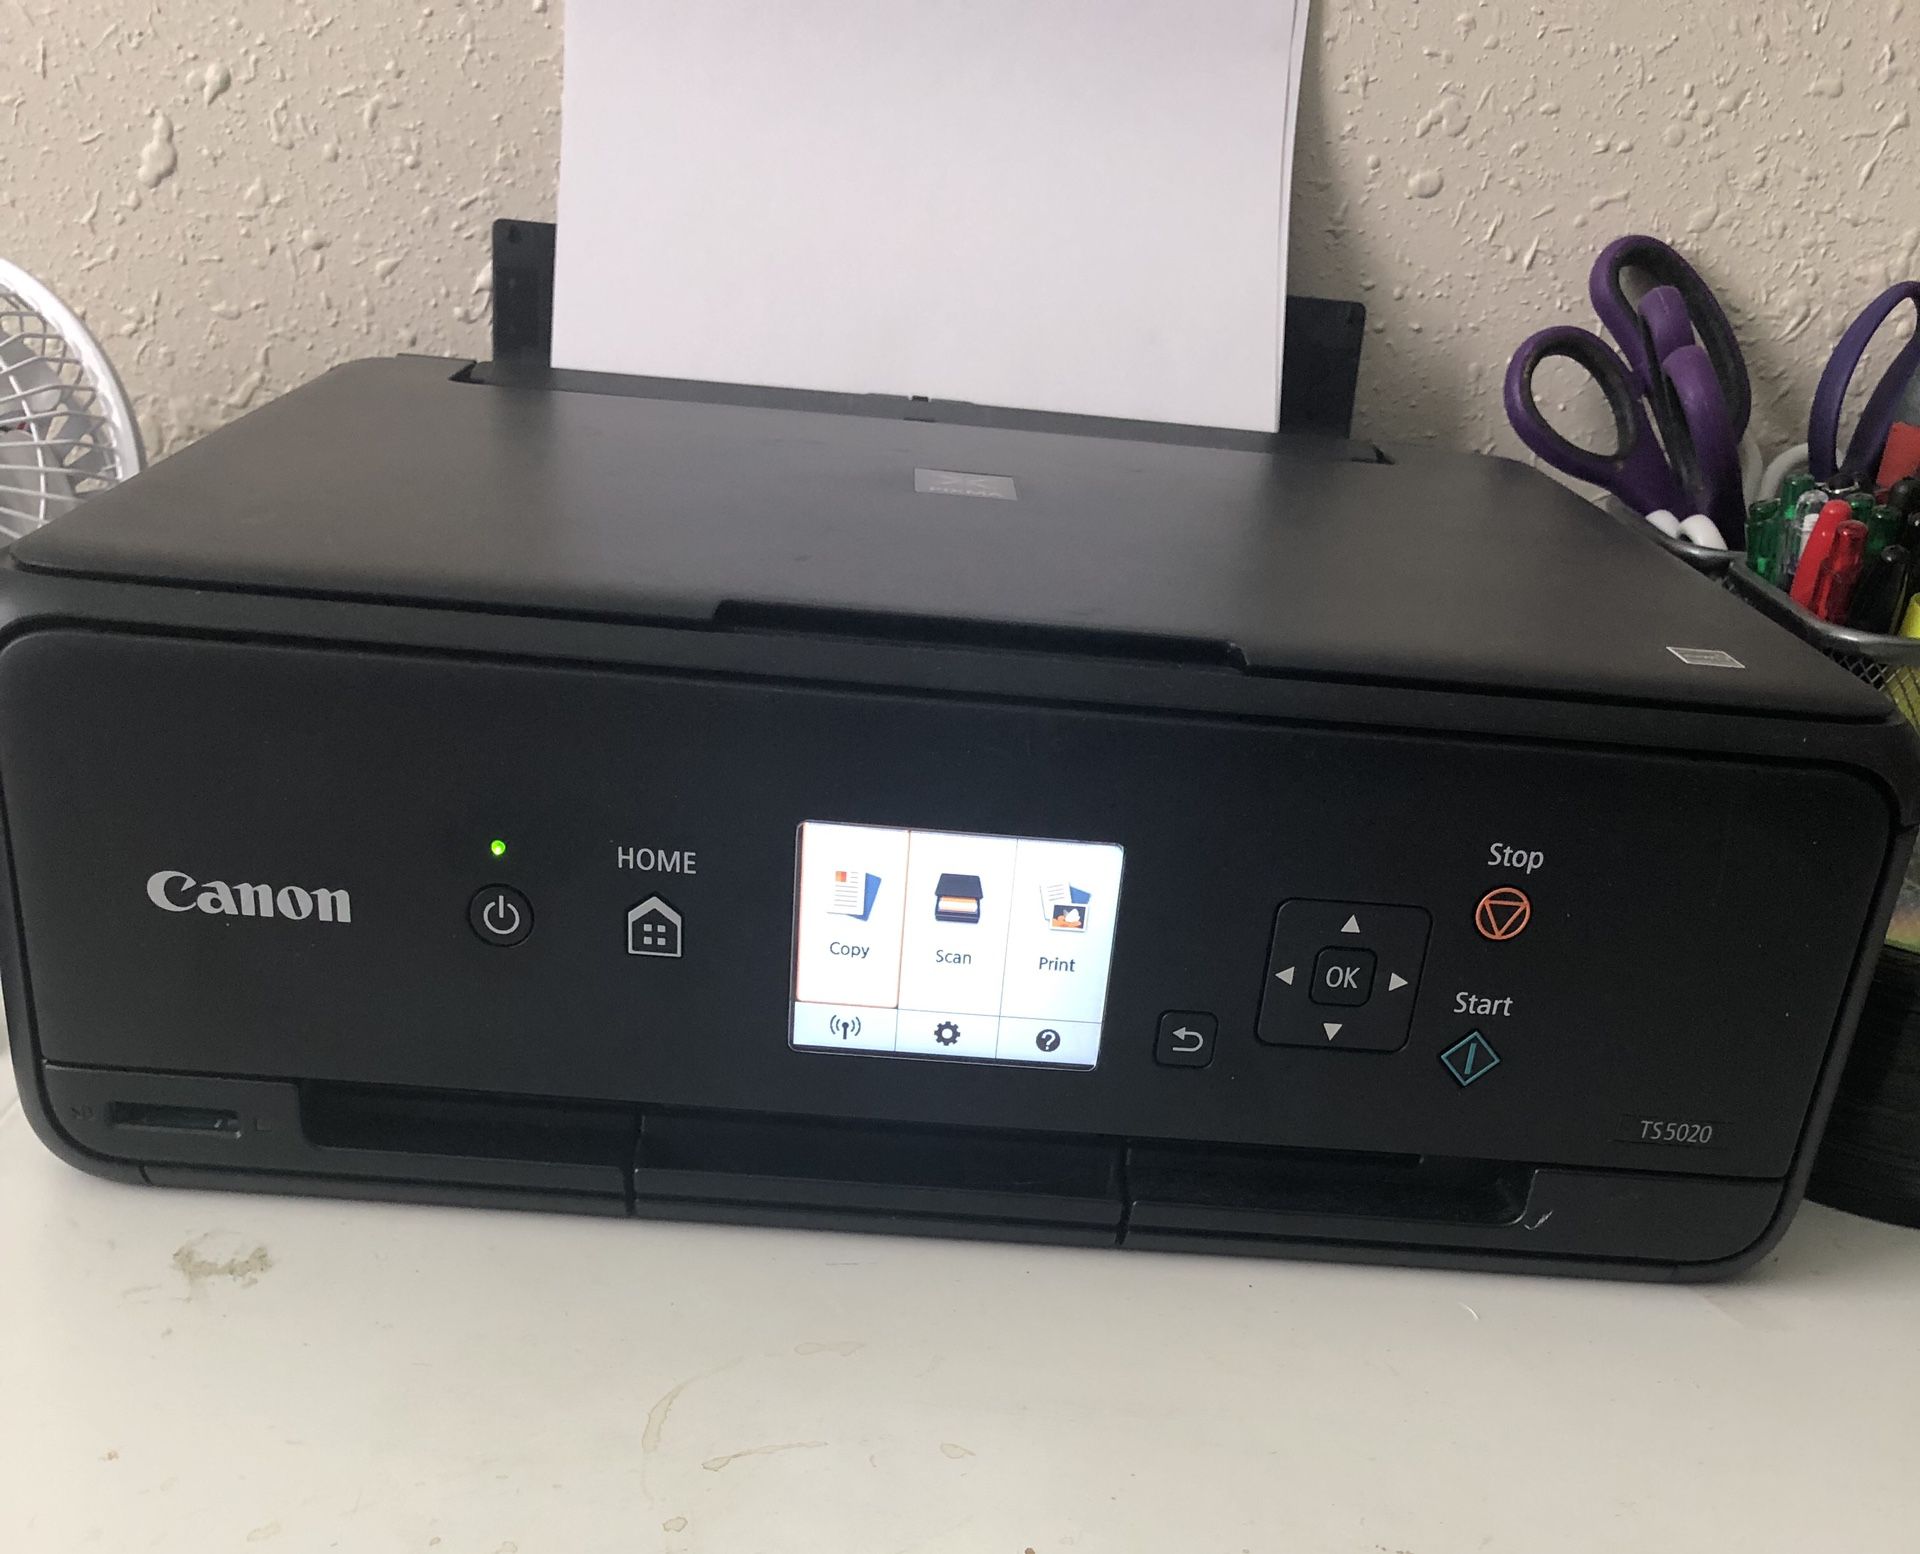 Canon TS5020 All in one printer.